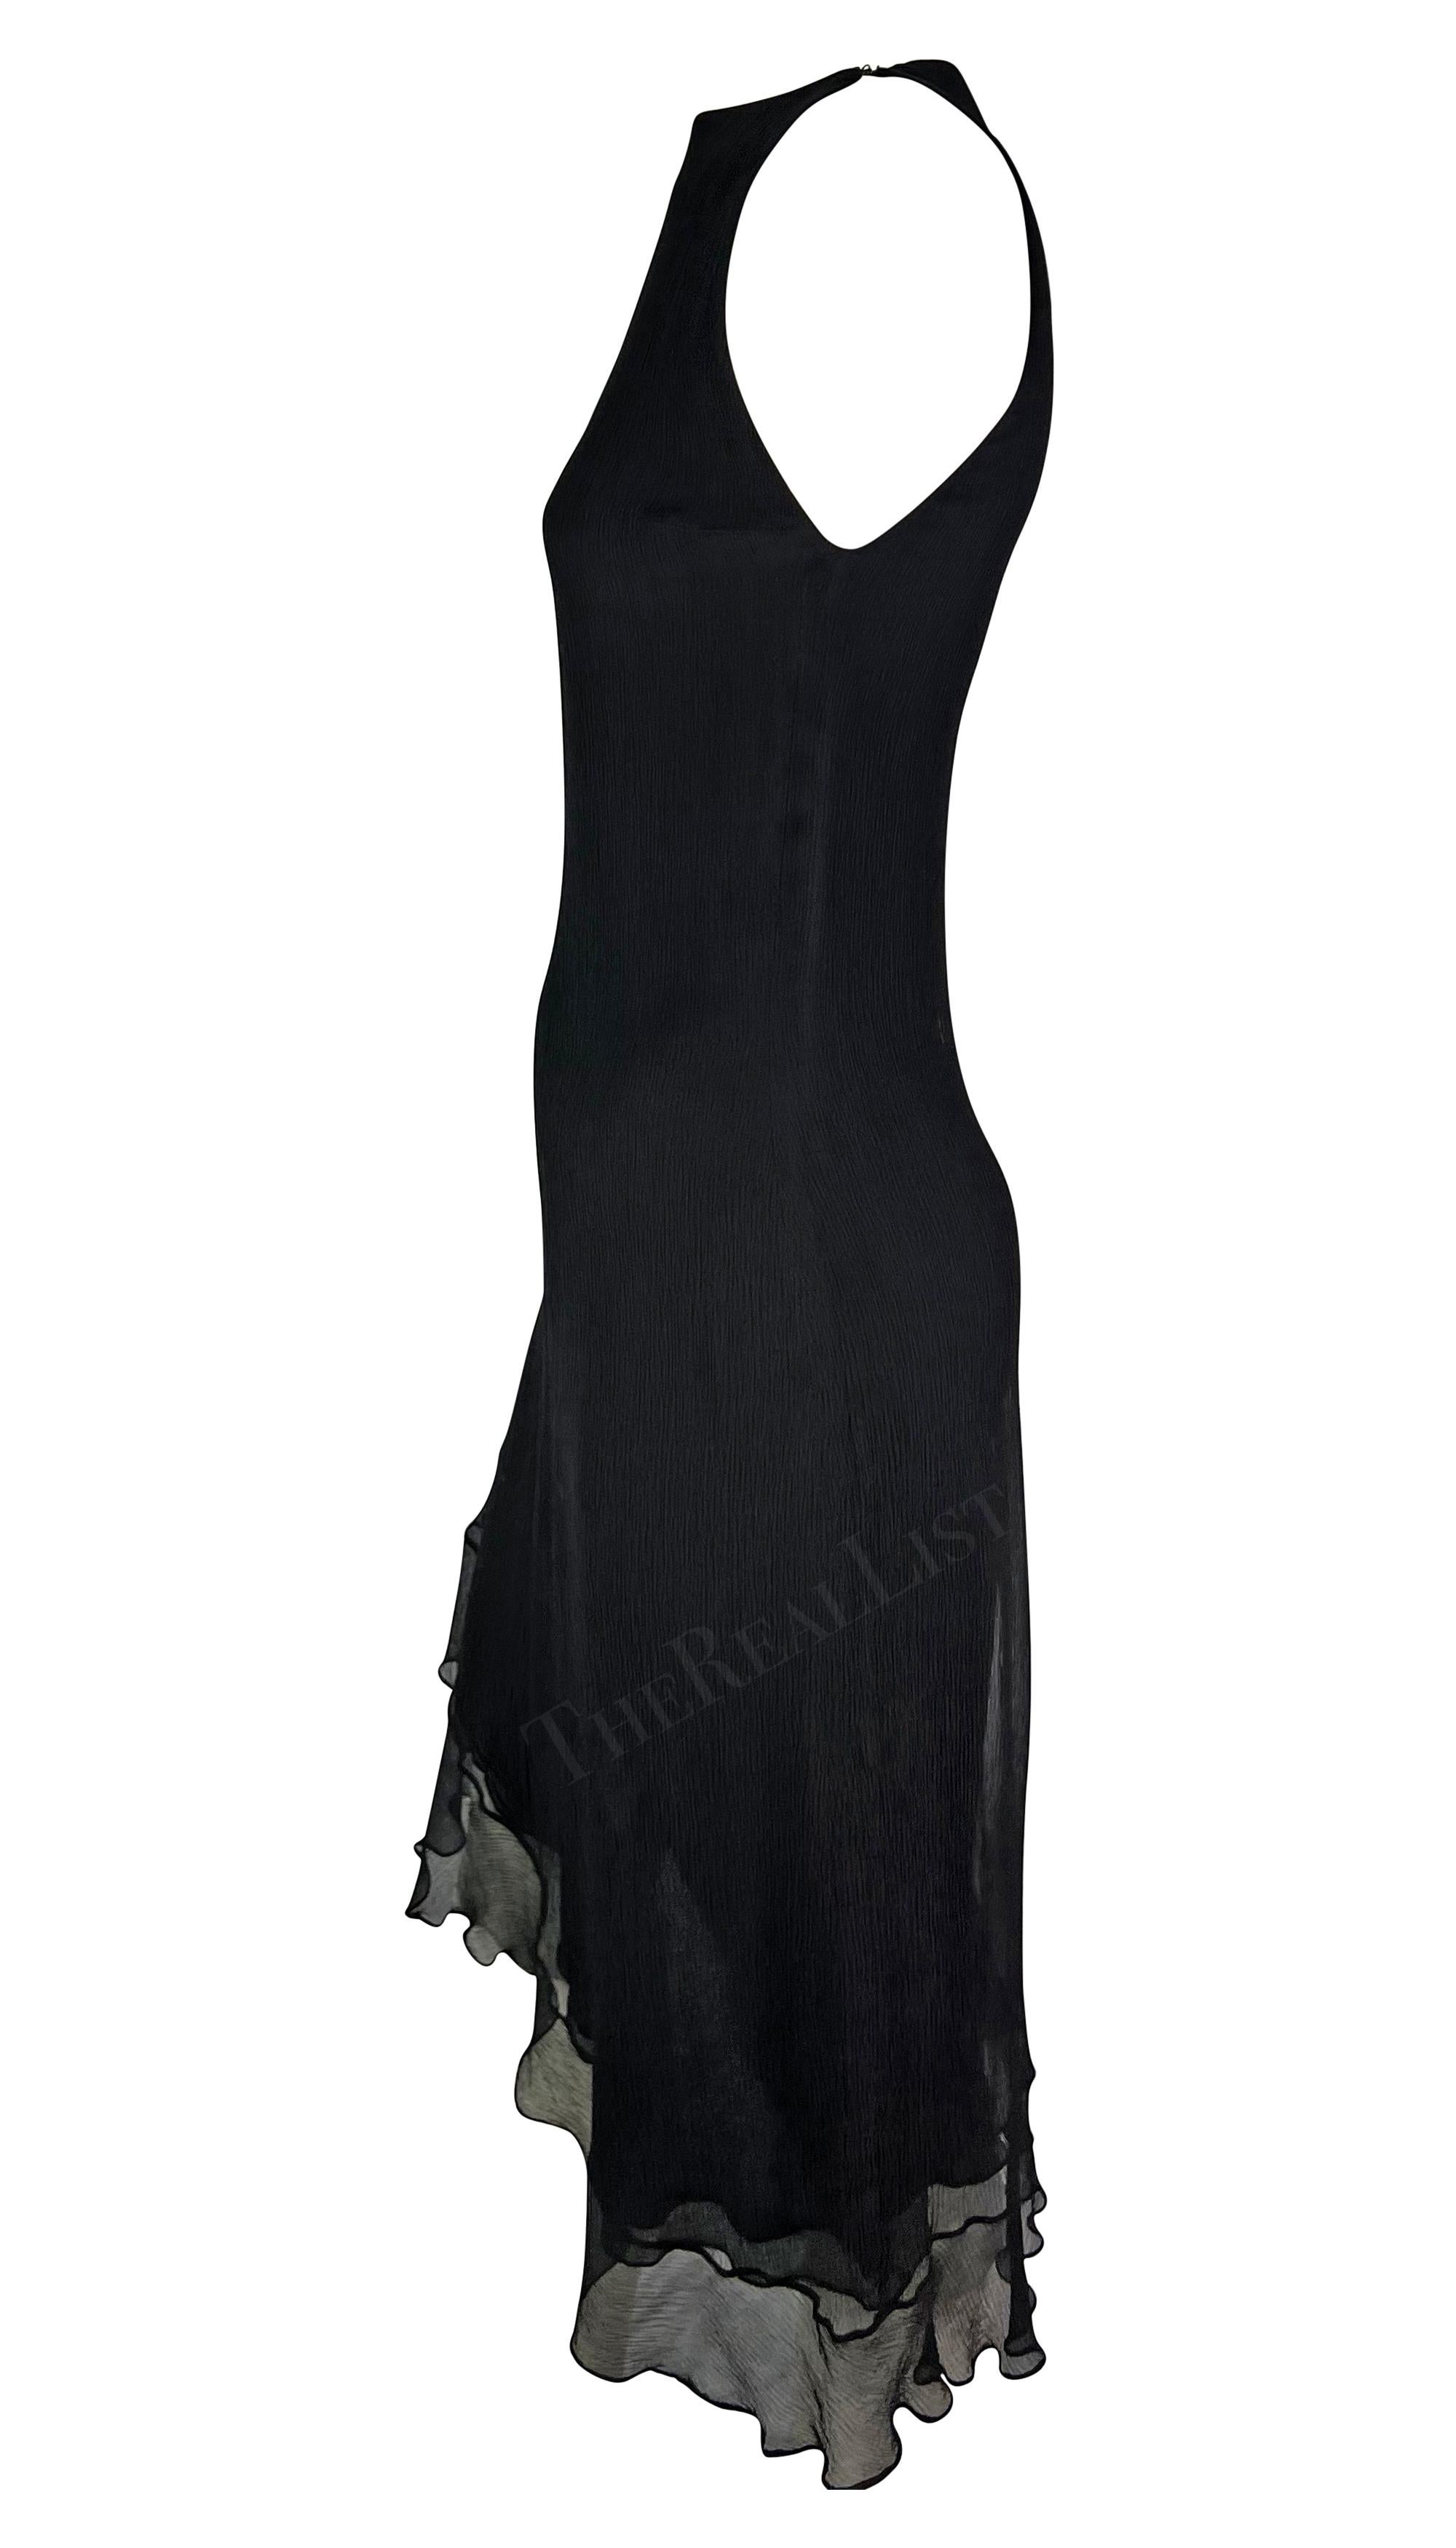 S/S 2000 Gucci by Tom Ford Black Crepe Silk Chiffon Ruffle Dress In Excellent Condition In West Hollywood, CA